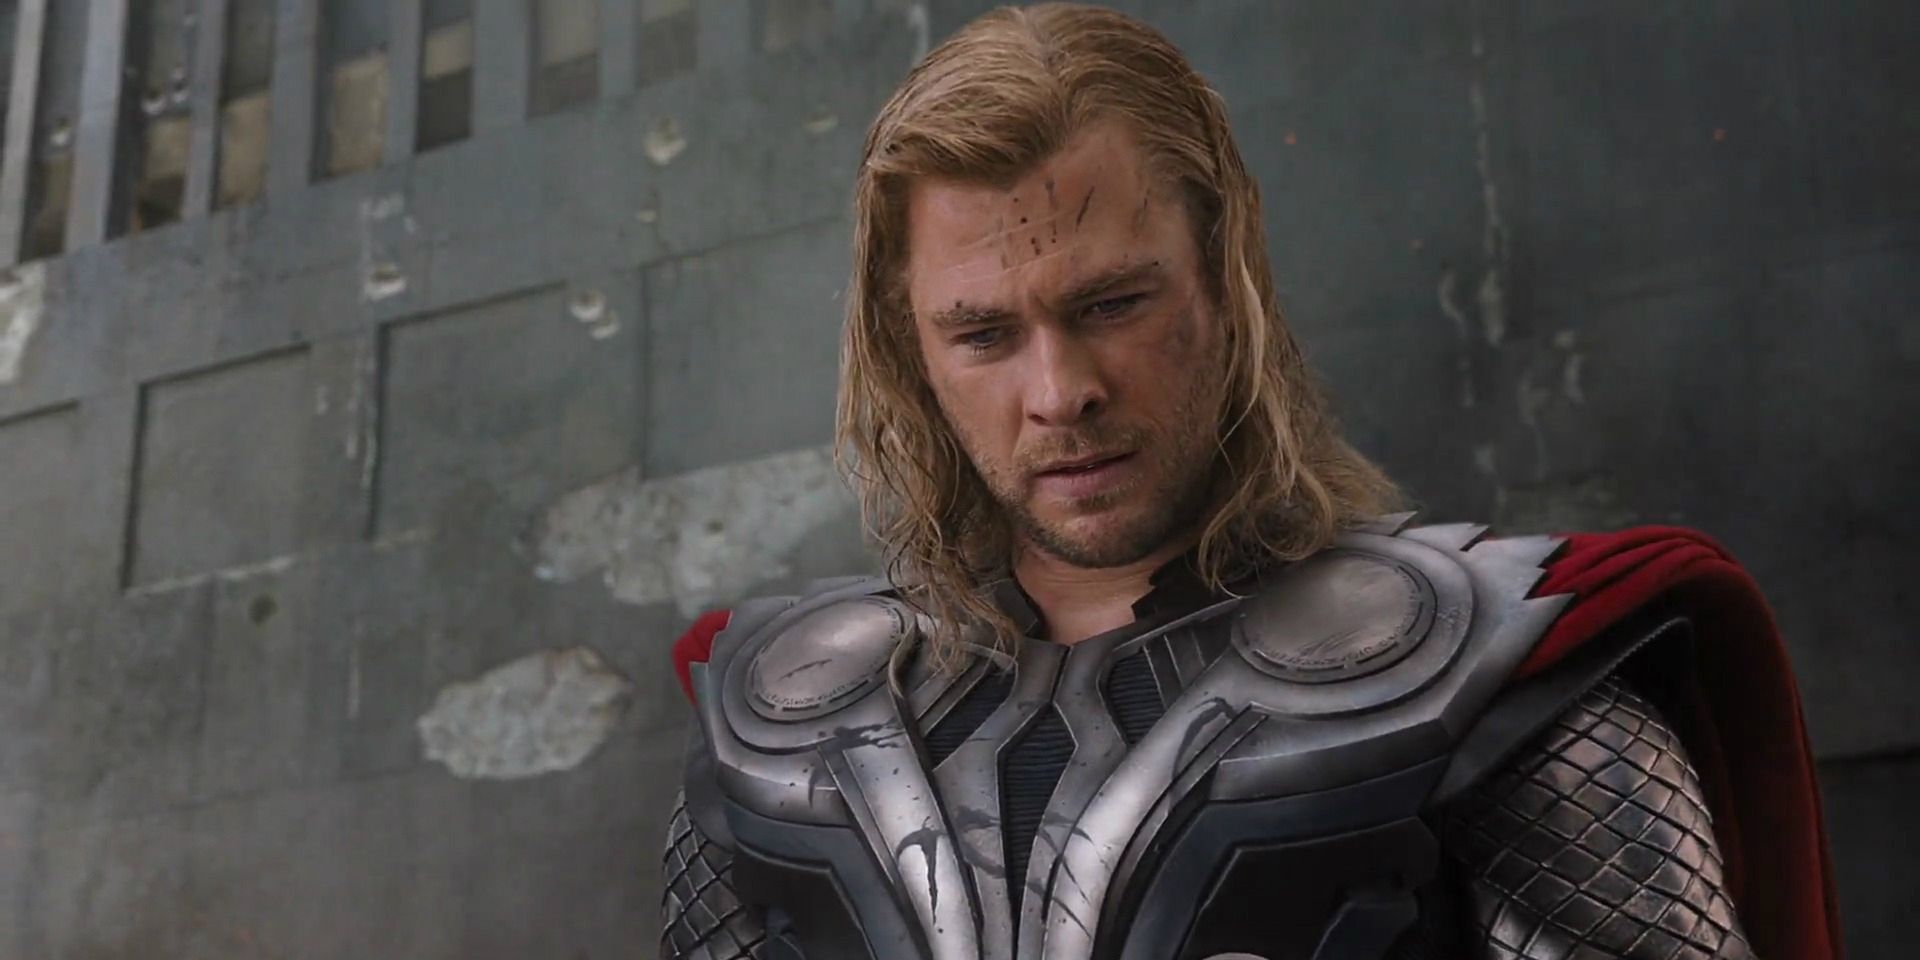 The Avengers Almost Cut Down Thor’s Role But Chris Hemsworth Saved It